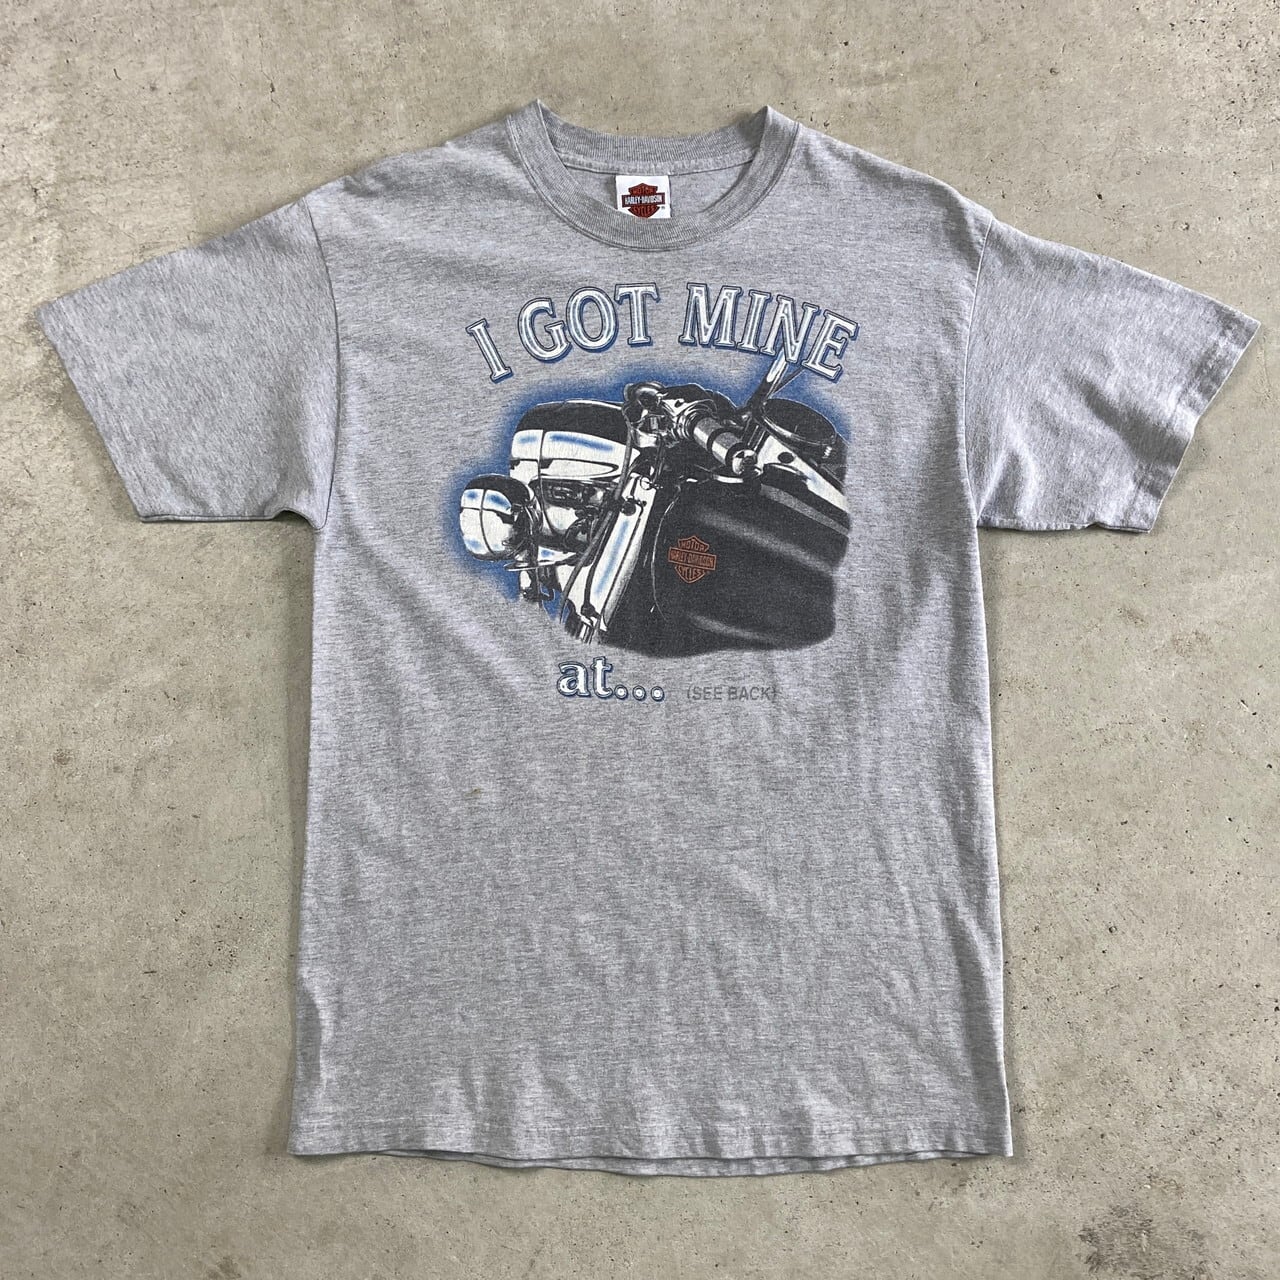 SEE SEE バイクプリントTシャツ　アメリカ製